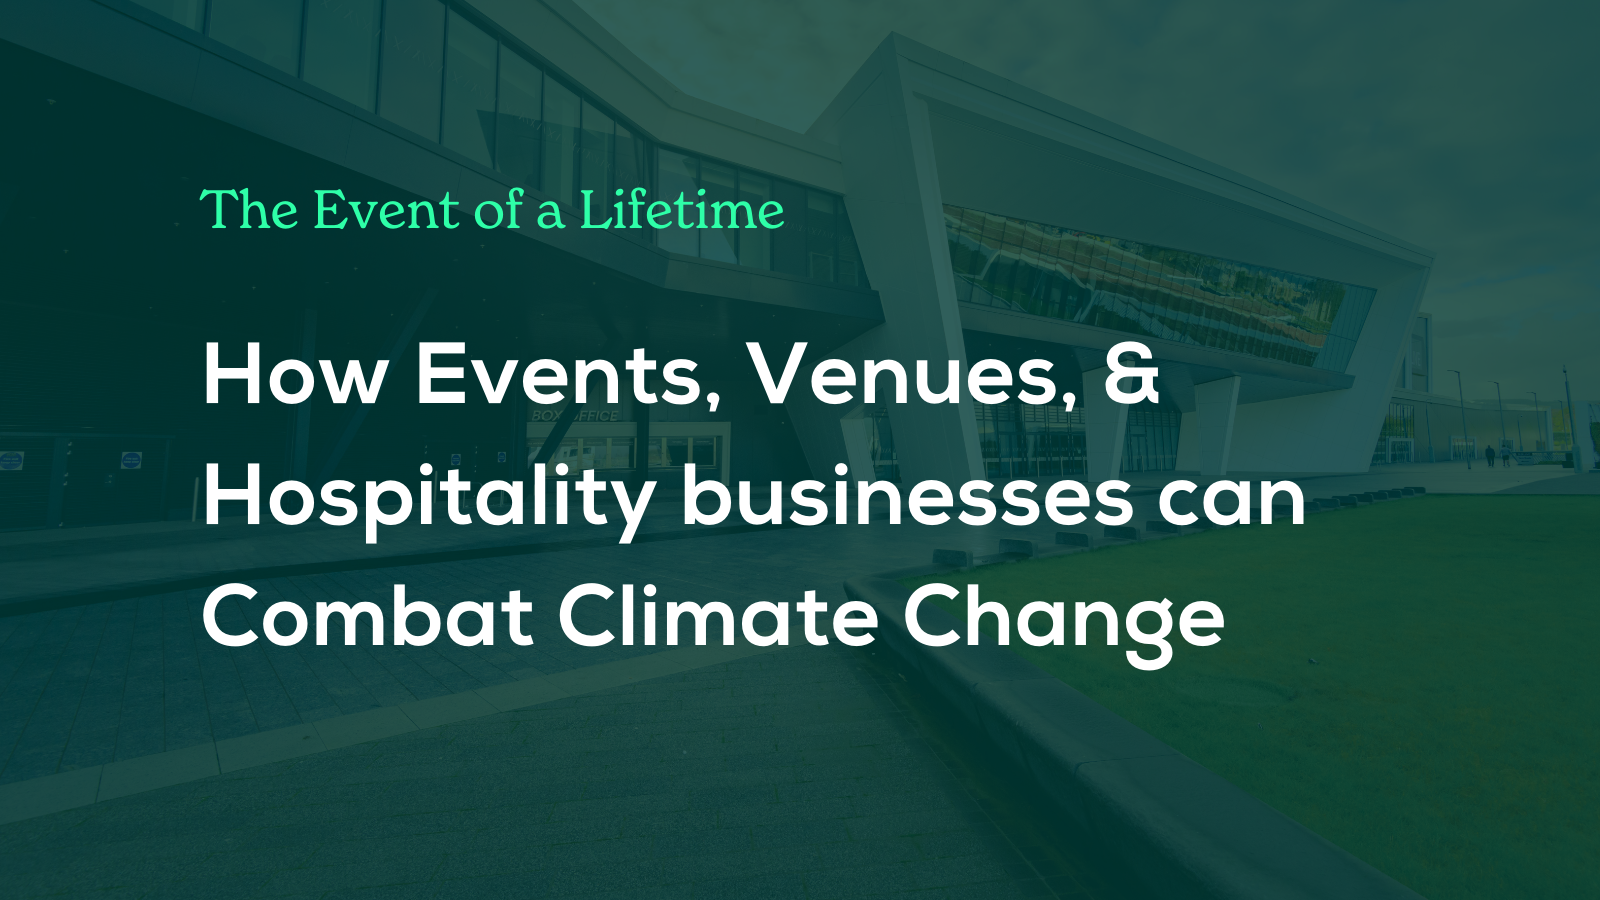 The Event of a Lifetime: How the Events, Venues & Hospitality Industry can Combat Climate Change